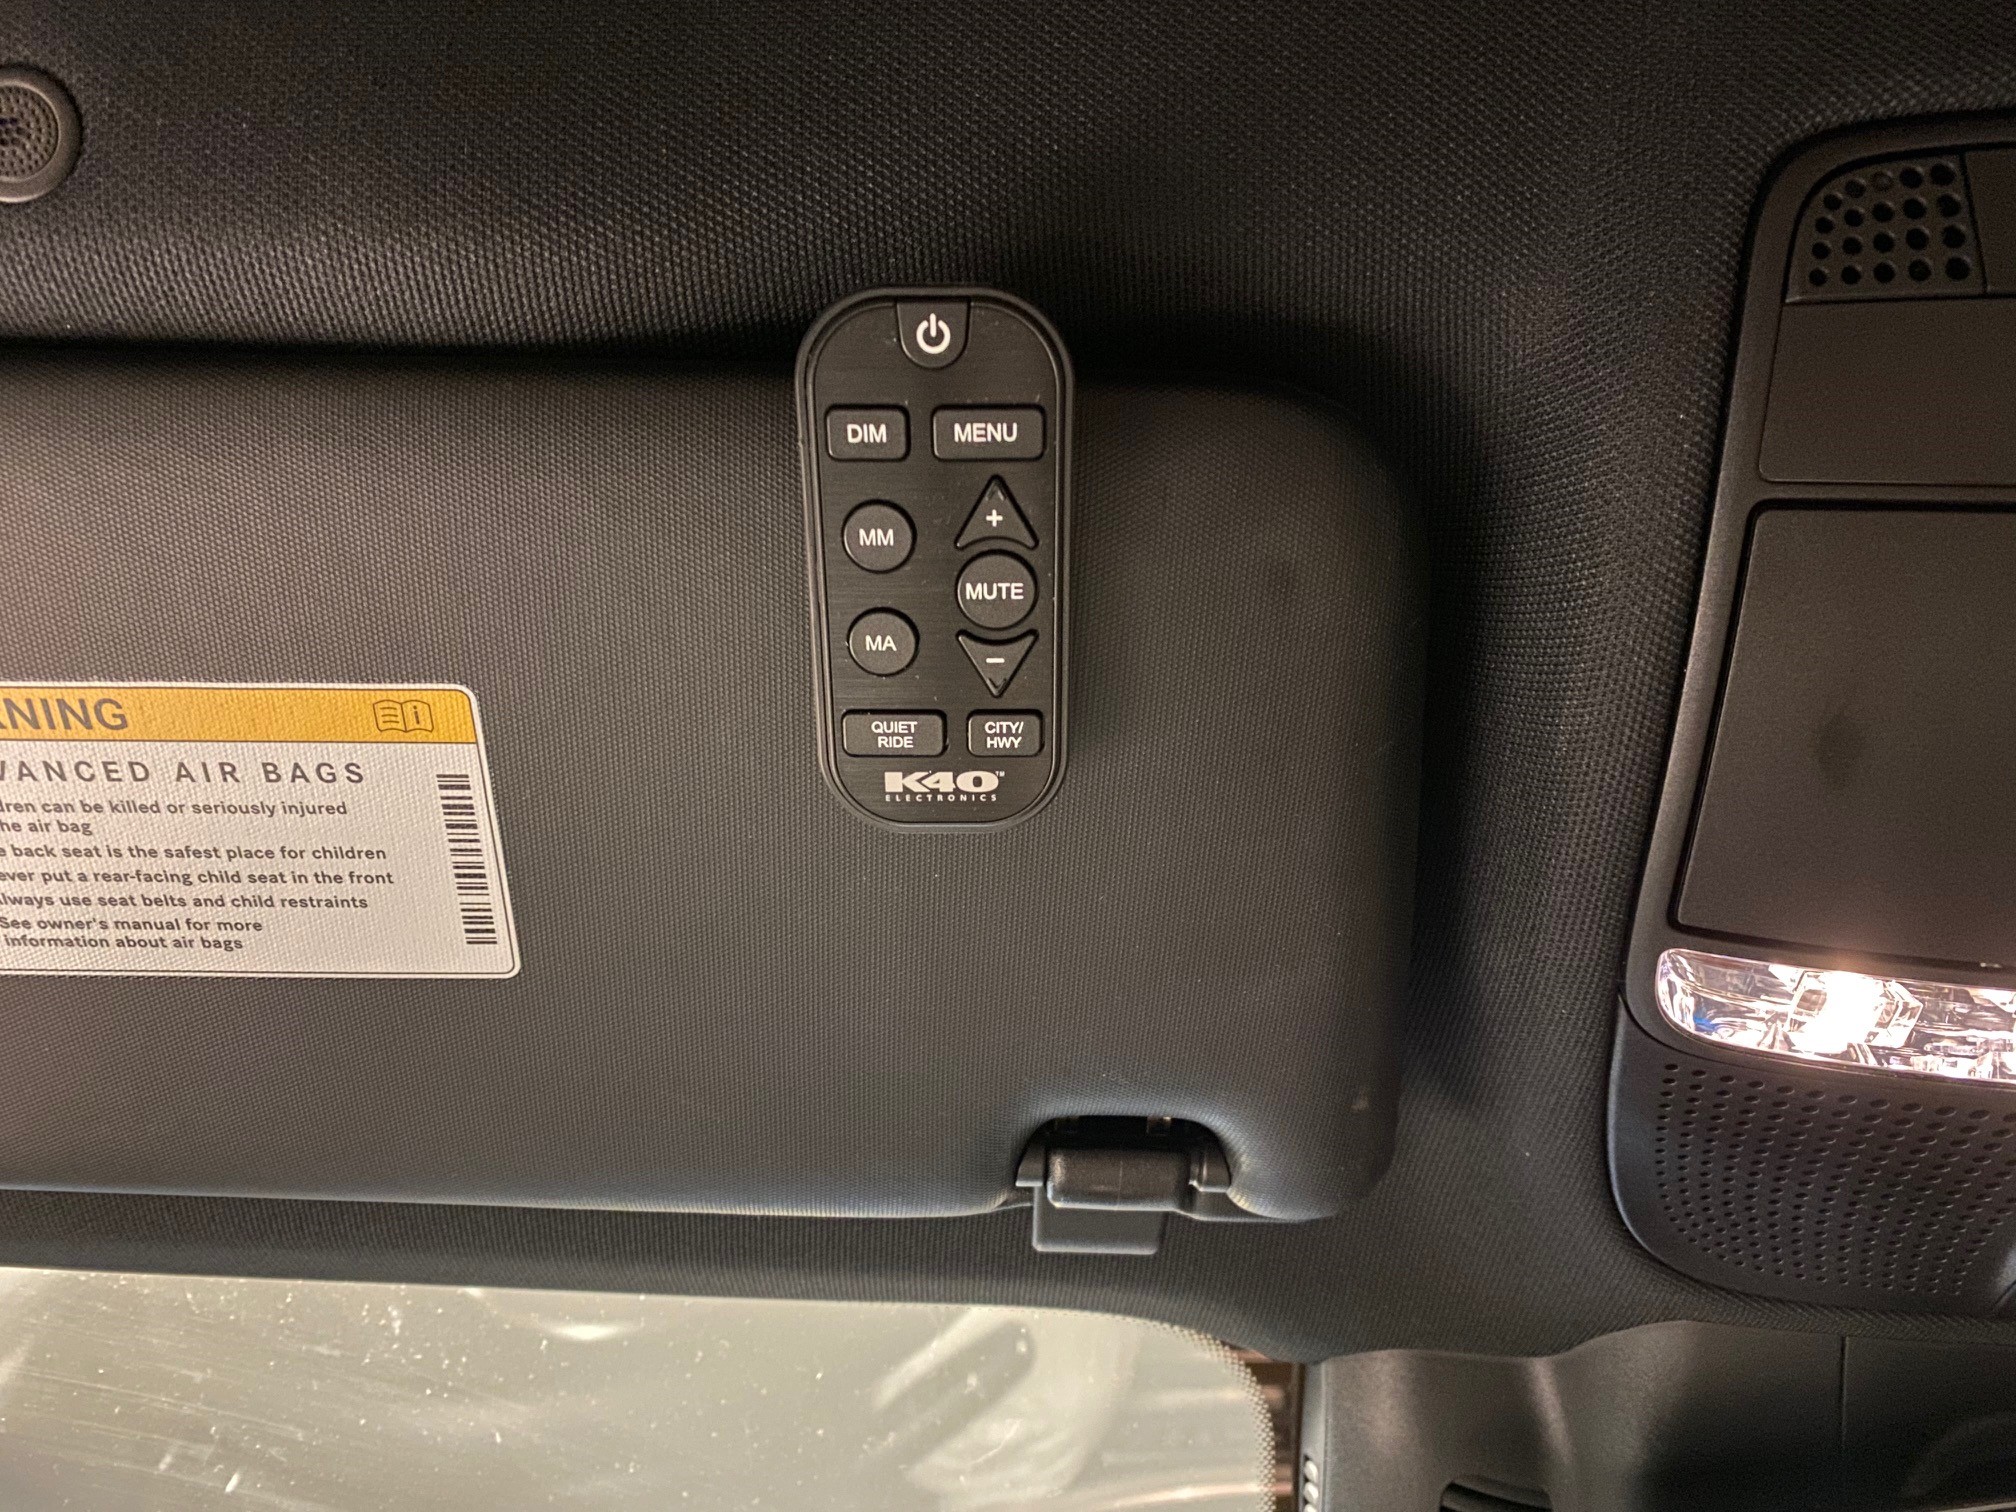 K40 Remot Control Used on the Visor of a 2020 Mercedes Benz E450 4Matic Wagon in Charlotte, NC